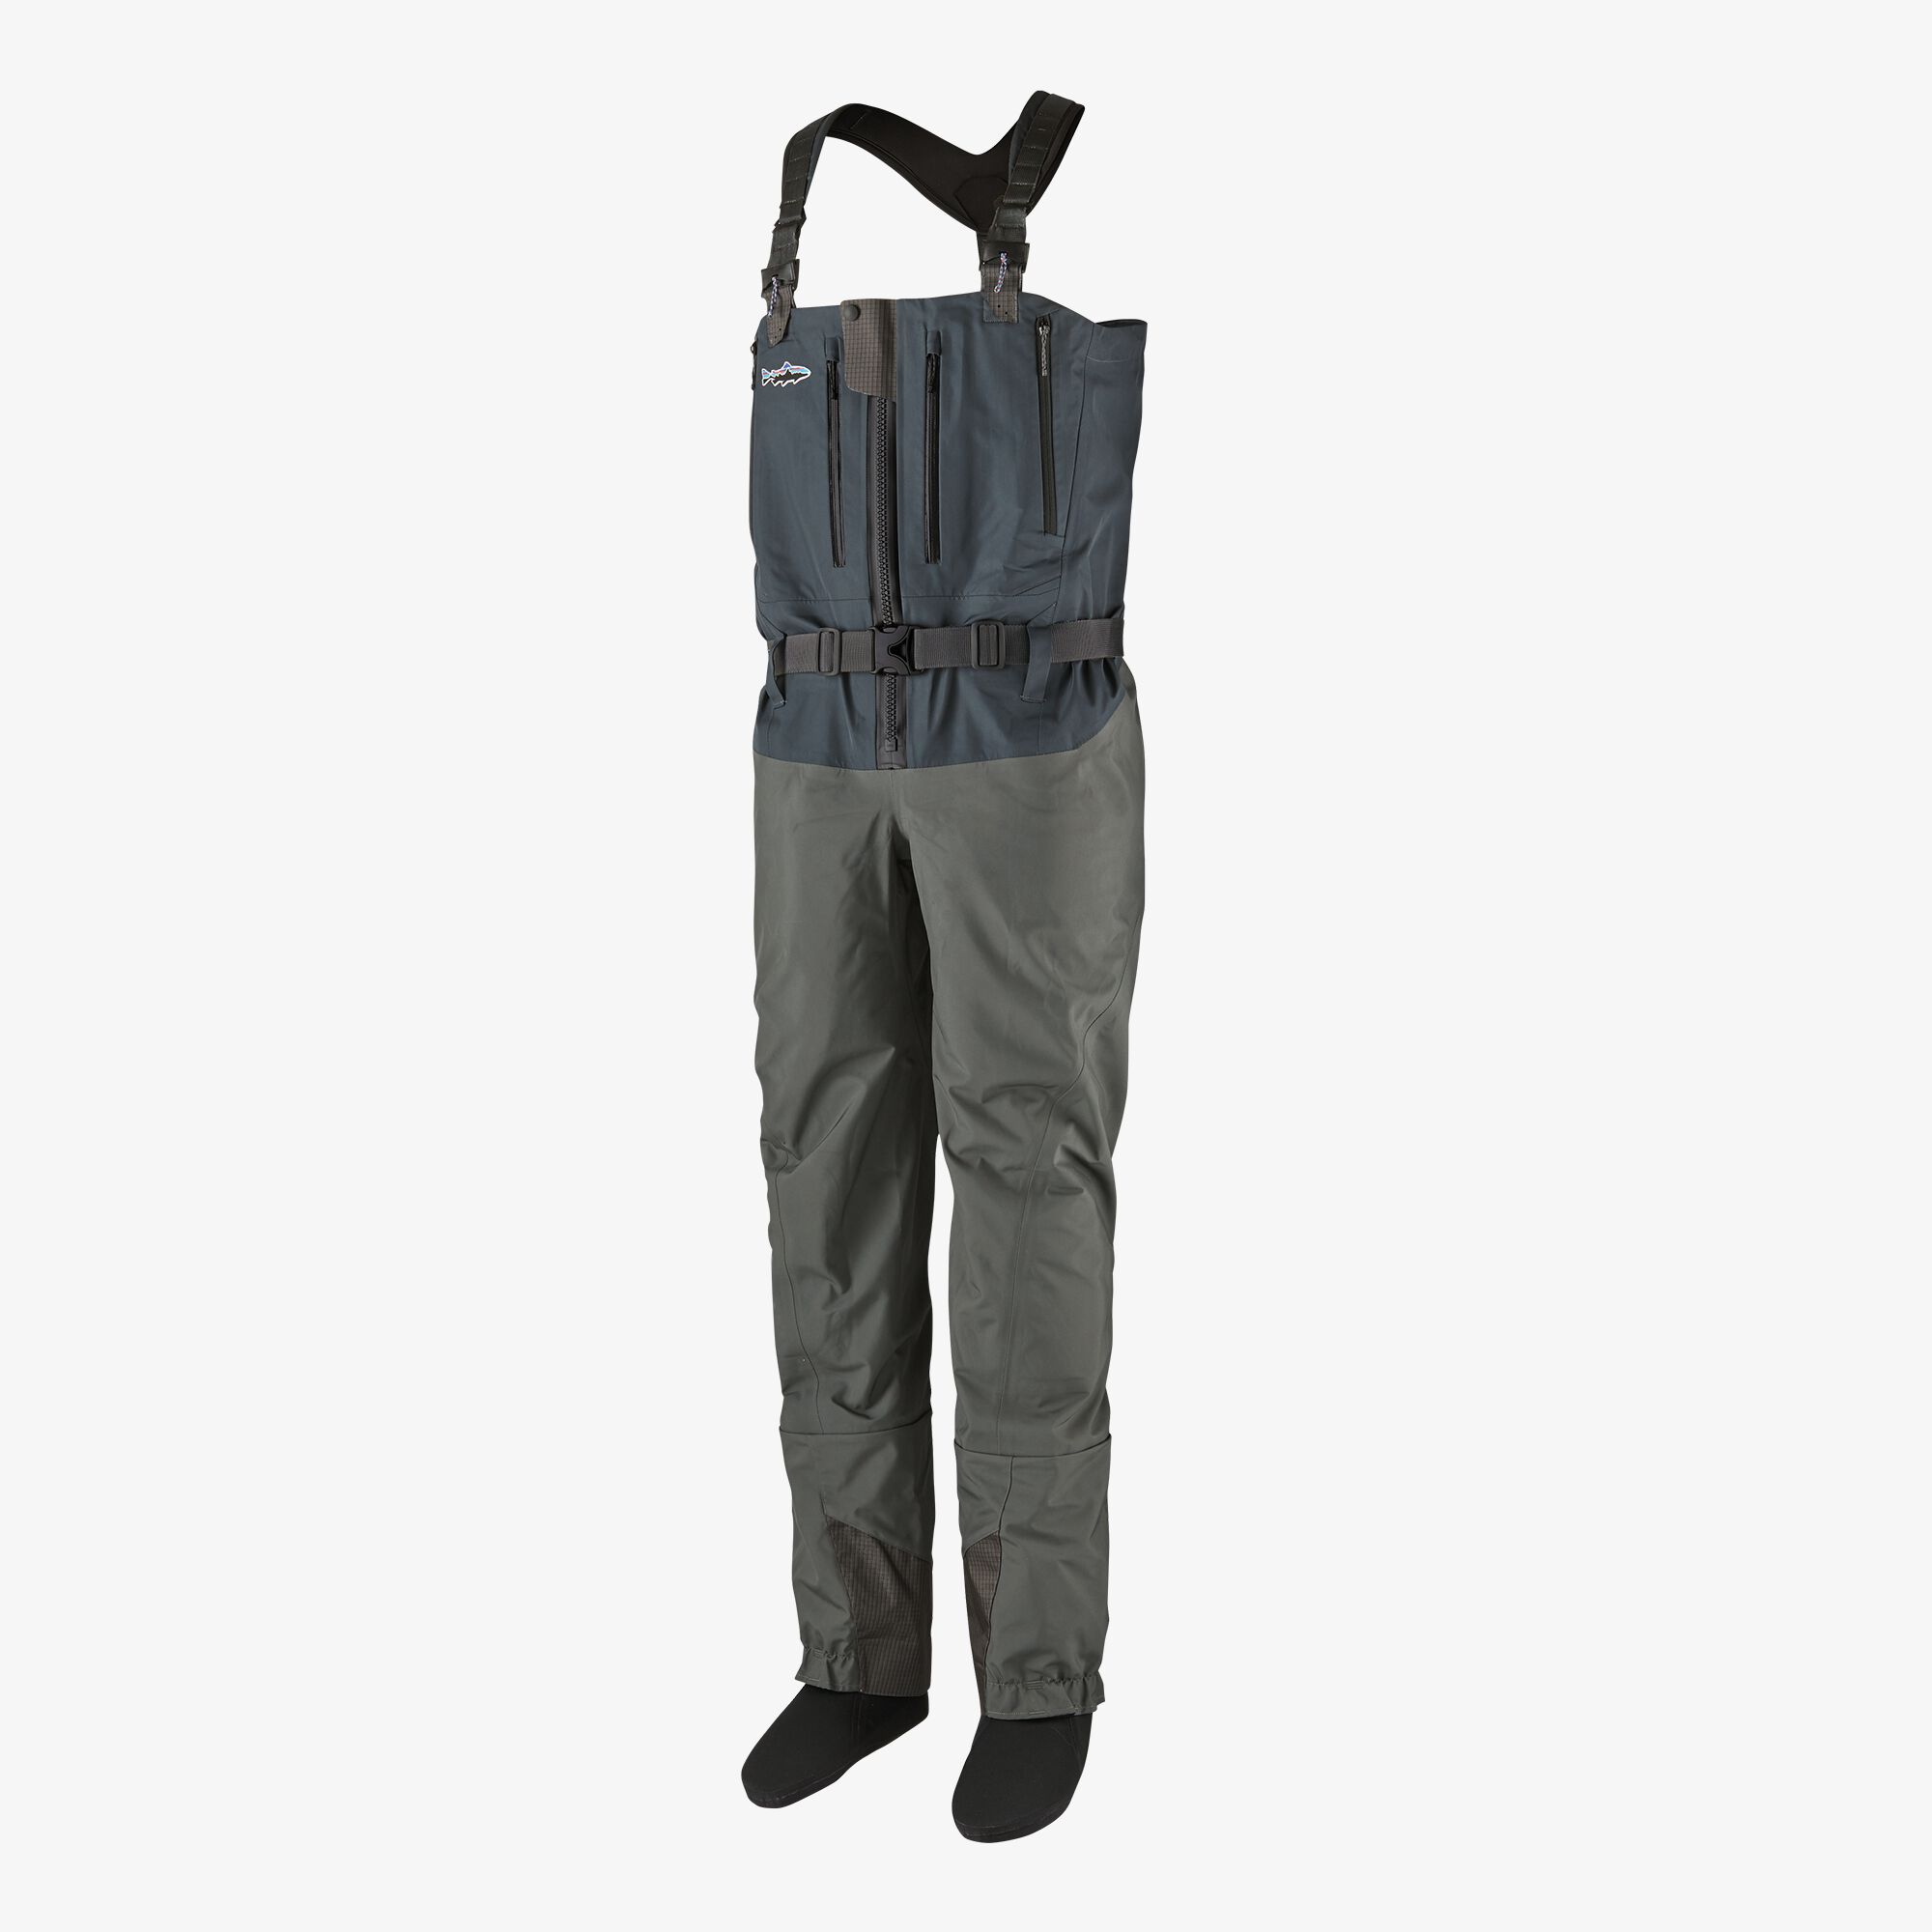 PATAGONIA SWIFTCURRENT EXPEDITION ZIP-FRONT WADER - FORGE GREY - LLL